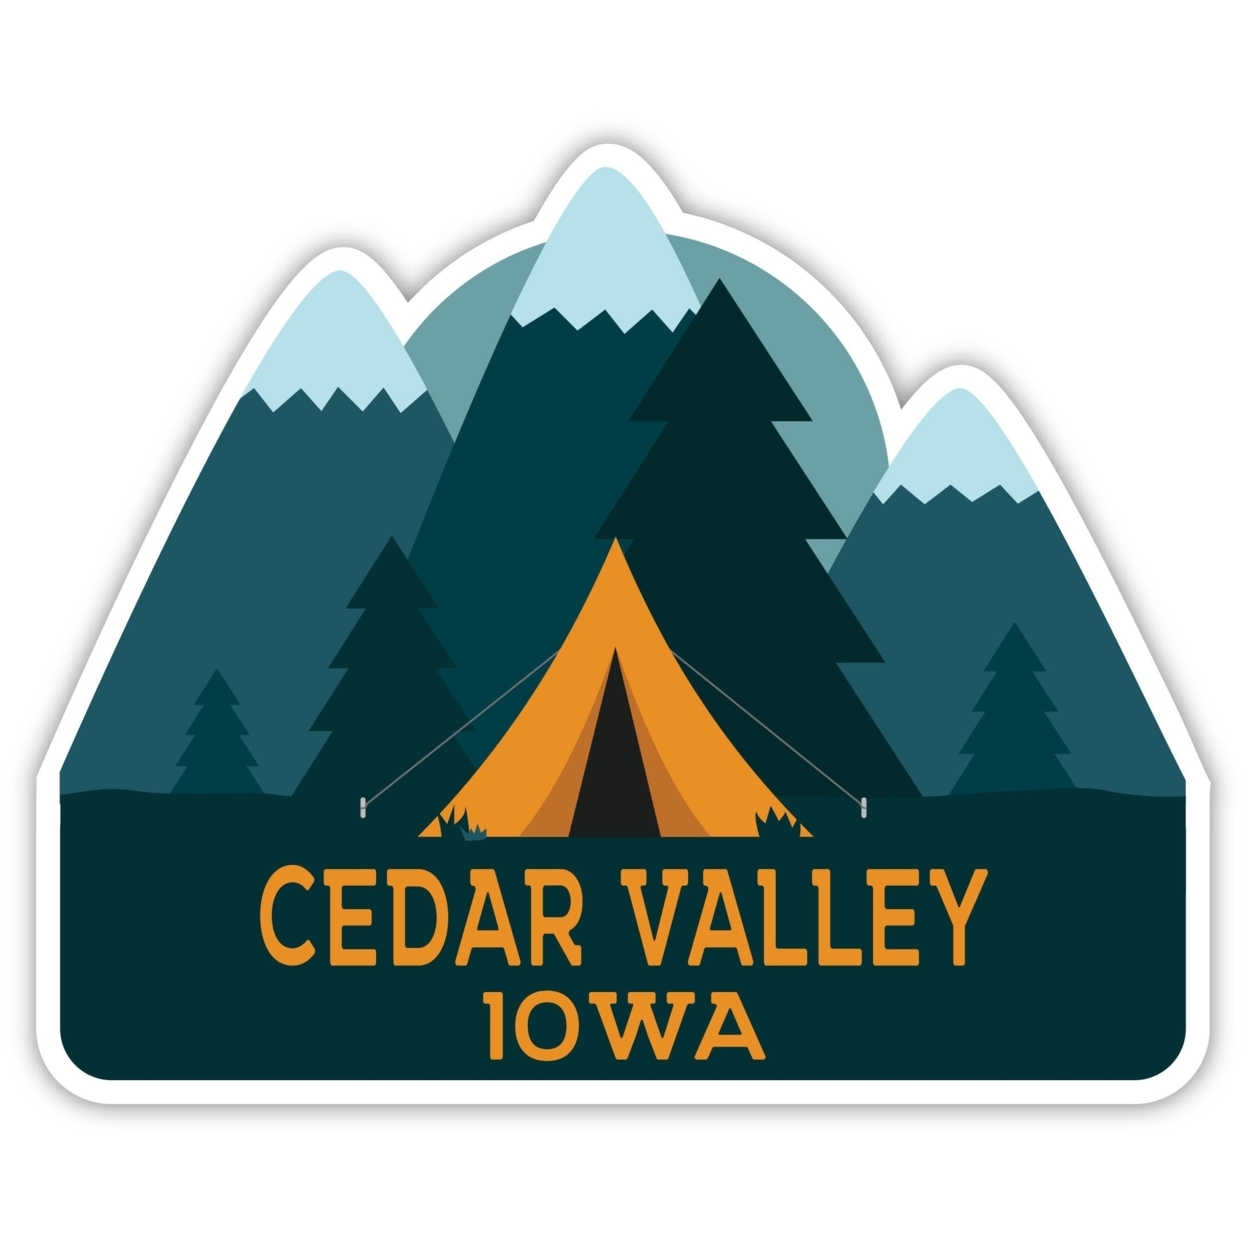 Cedar Valley Iowa Souvenir Decorative Stickers (Choose Theme And Size) - 4-Pack, 4-Inch, Tent